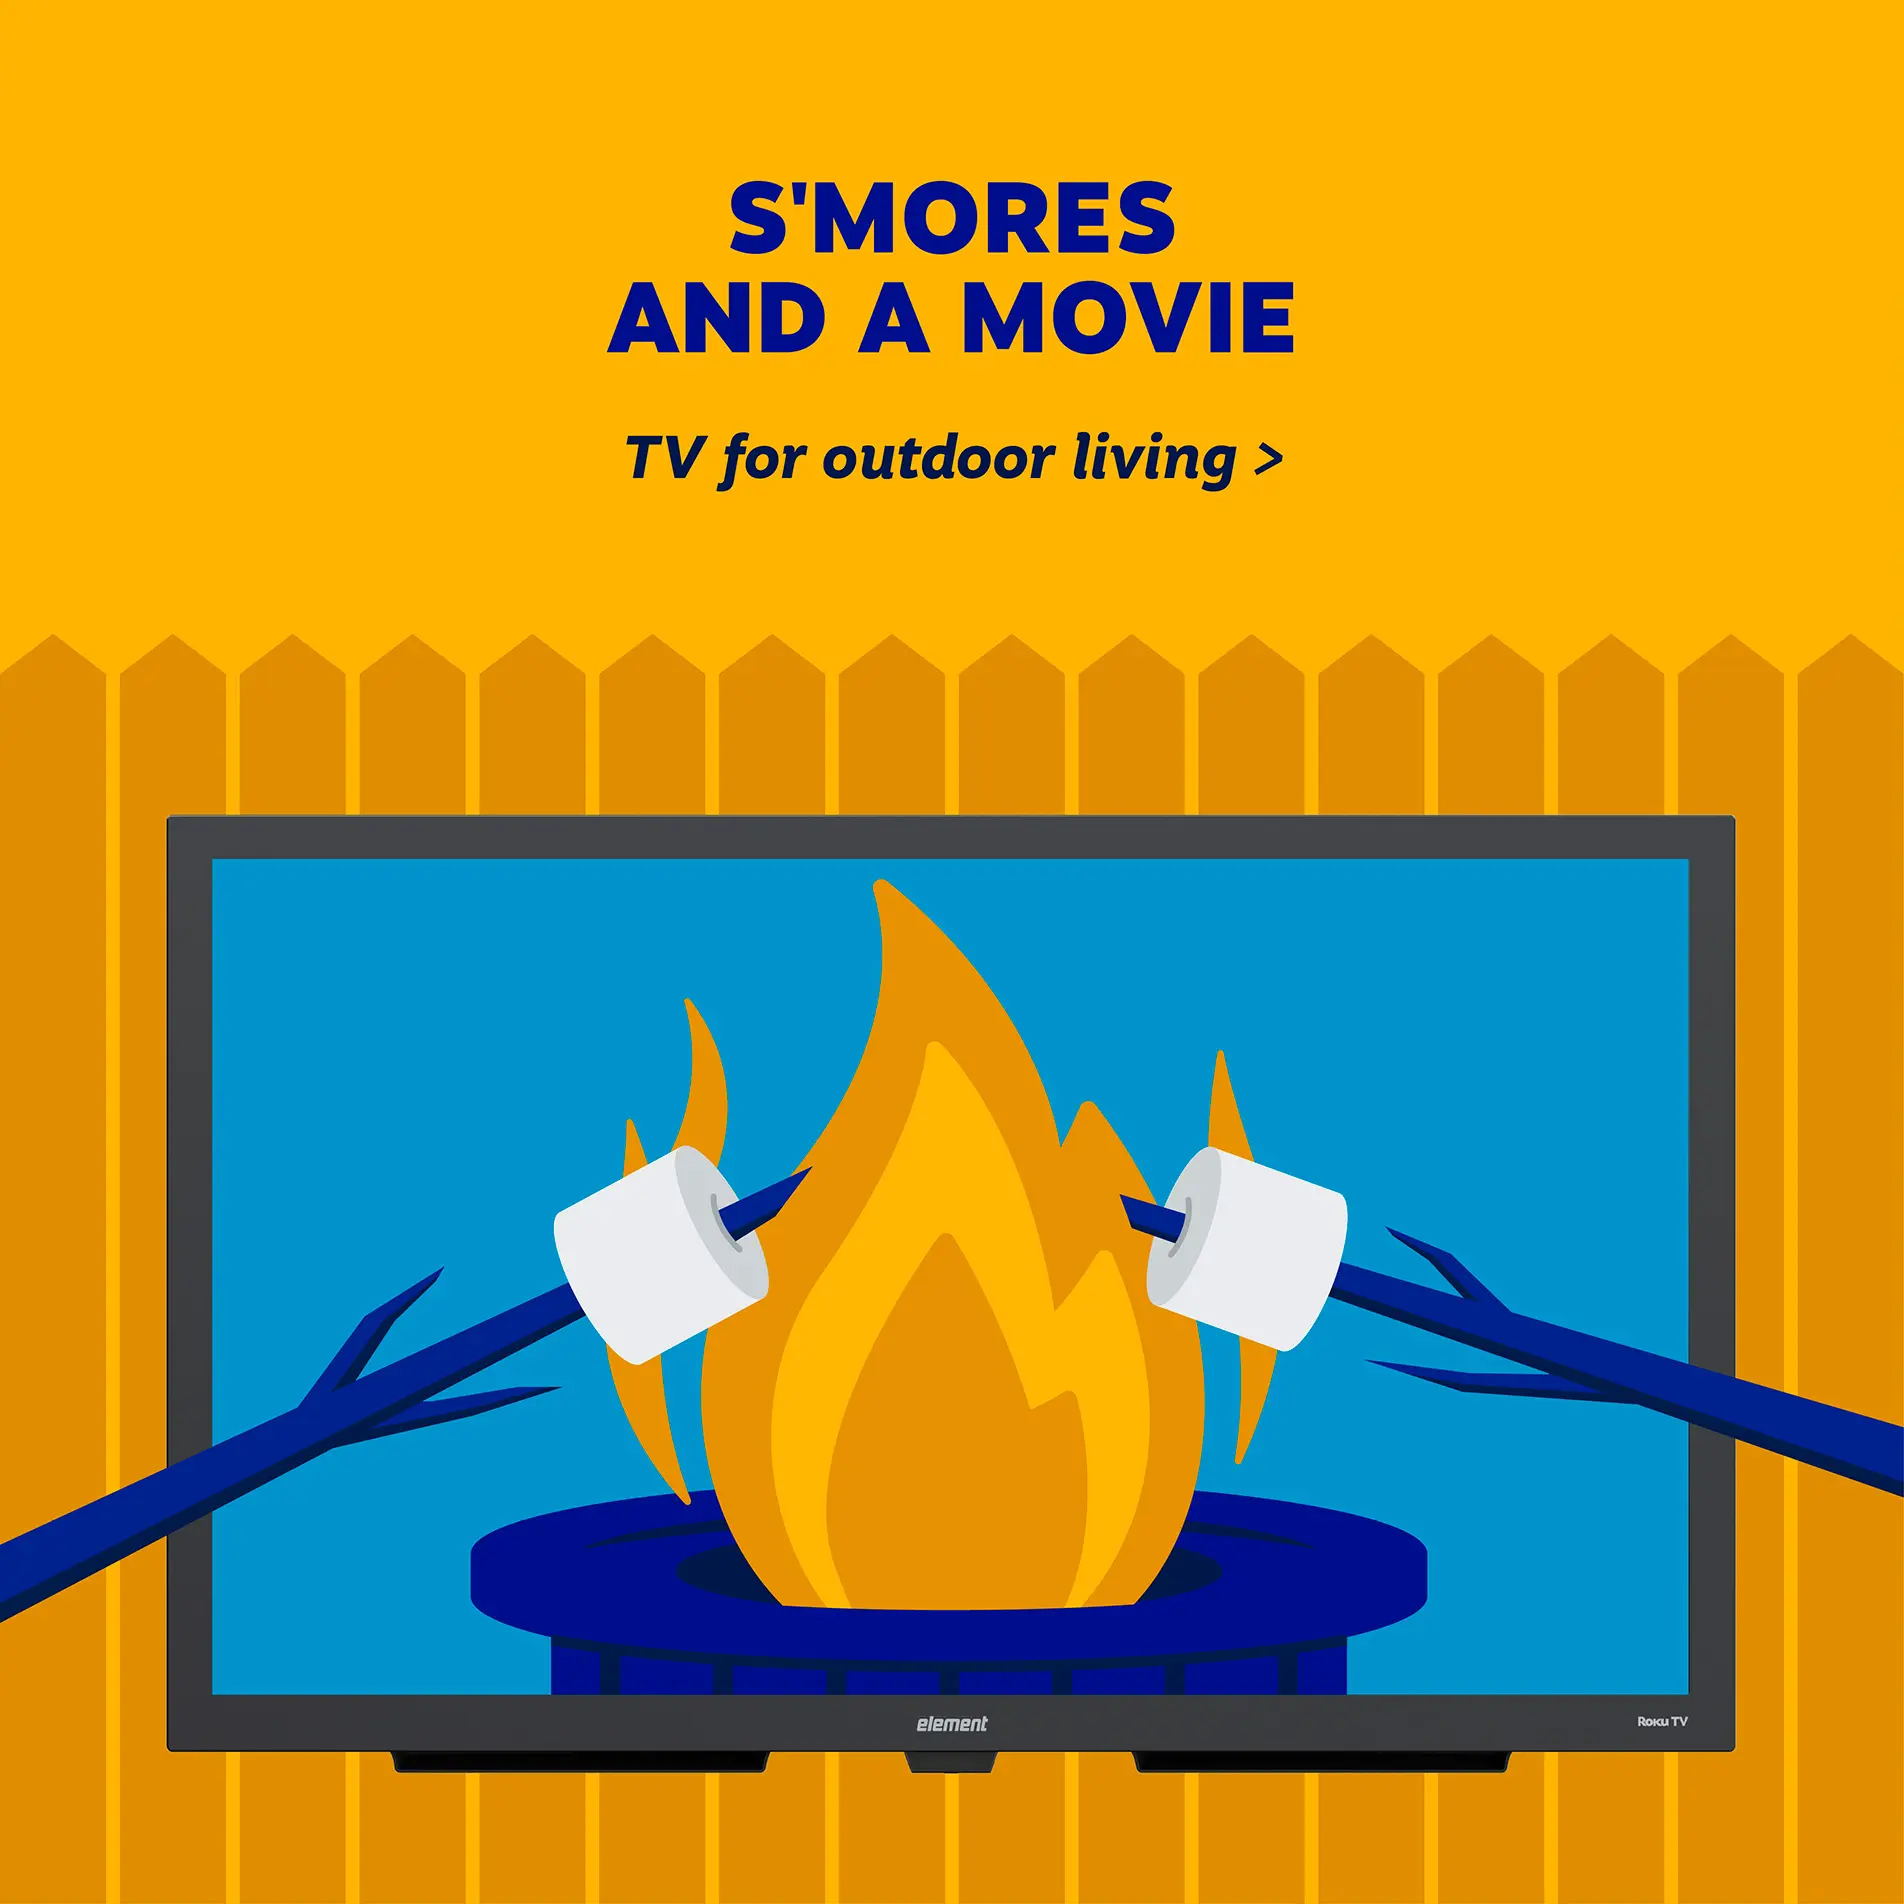 Element Outdoor Roku TV: s'mores and a movie - TV for outdoor living